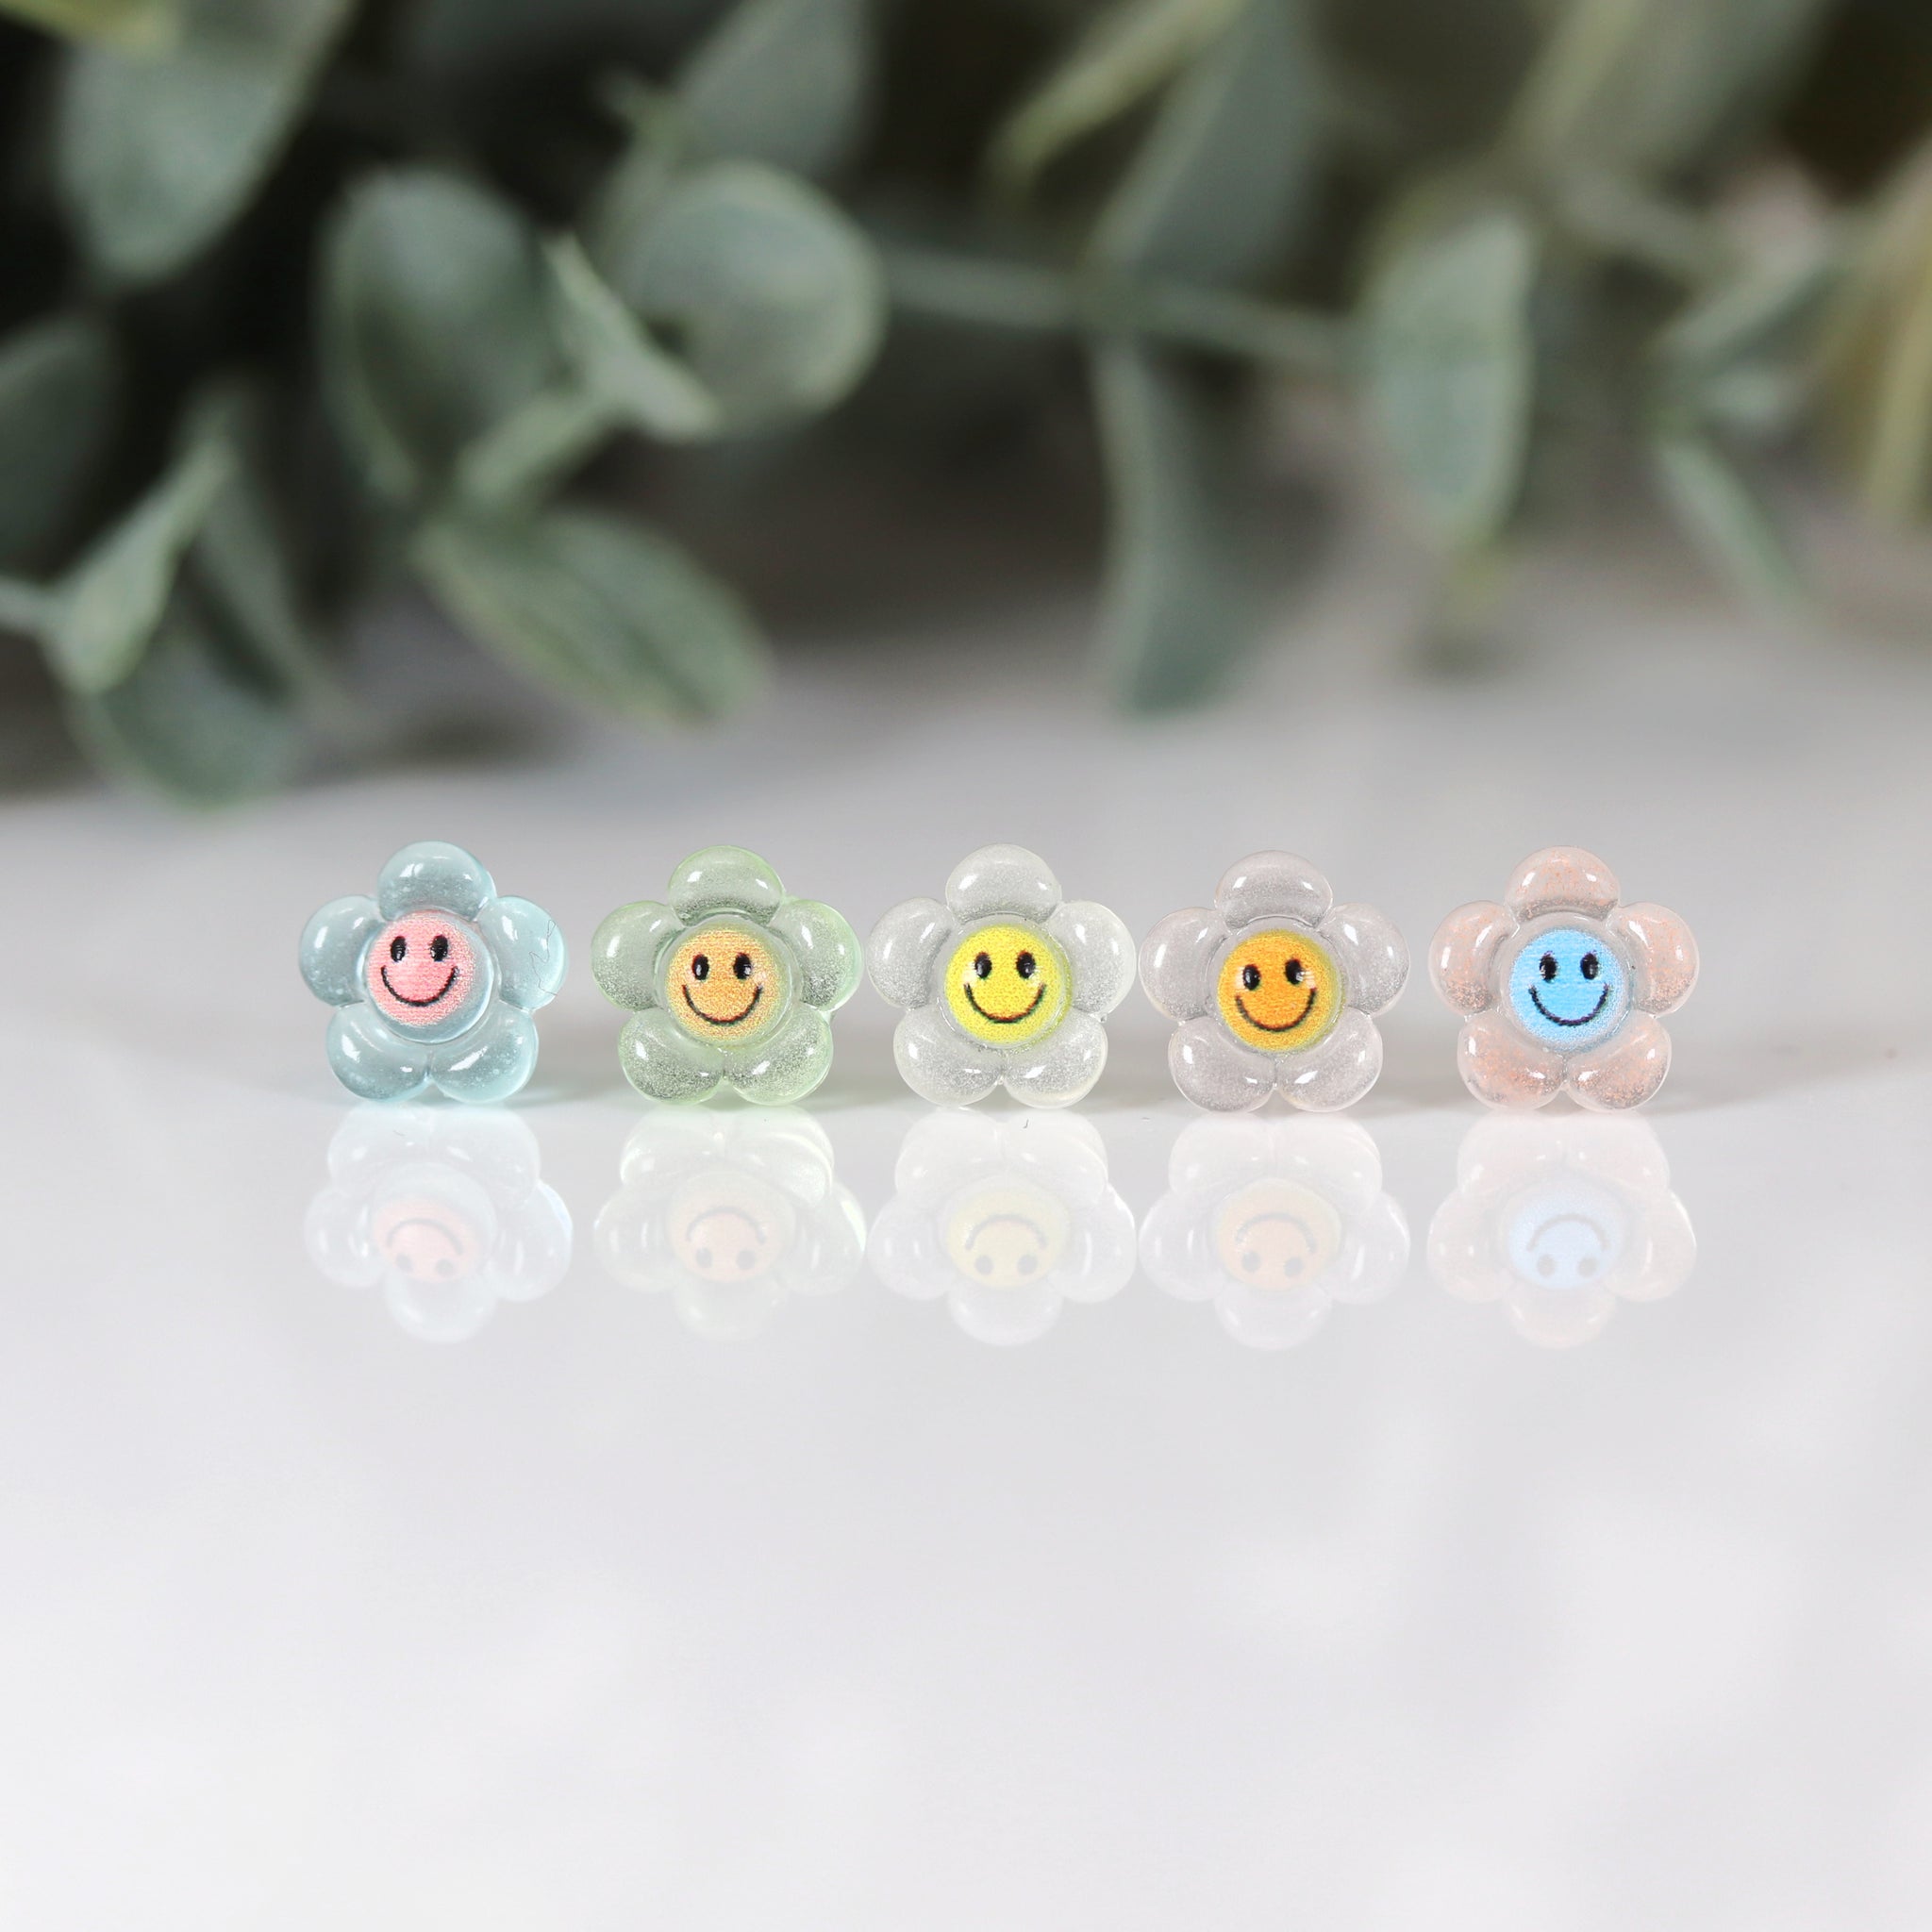 Plastic Post Earrings or Invisible Clip On Glow in the Dark Smiley Fac –  Pretty Smart